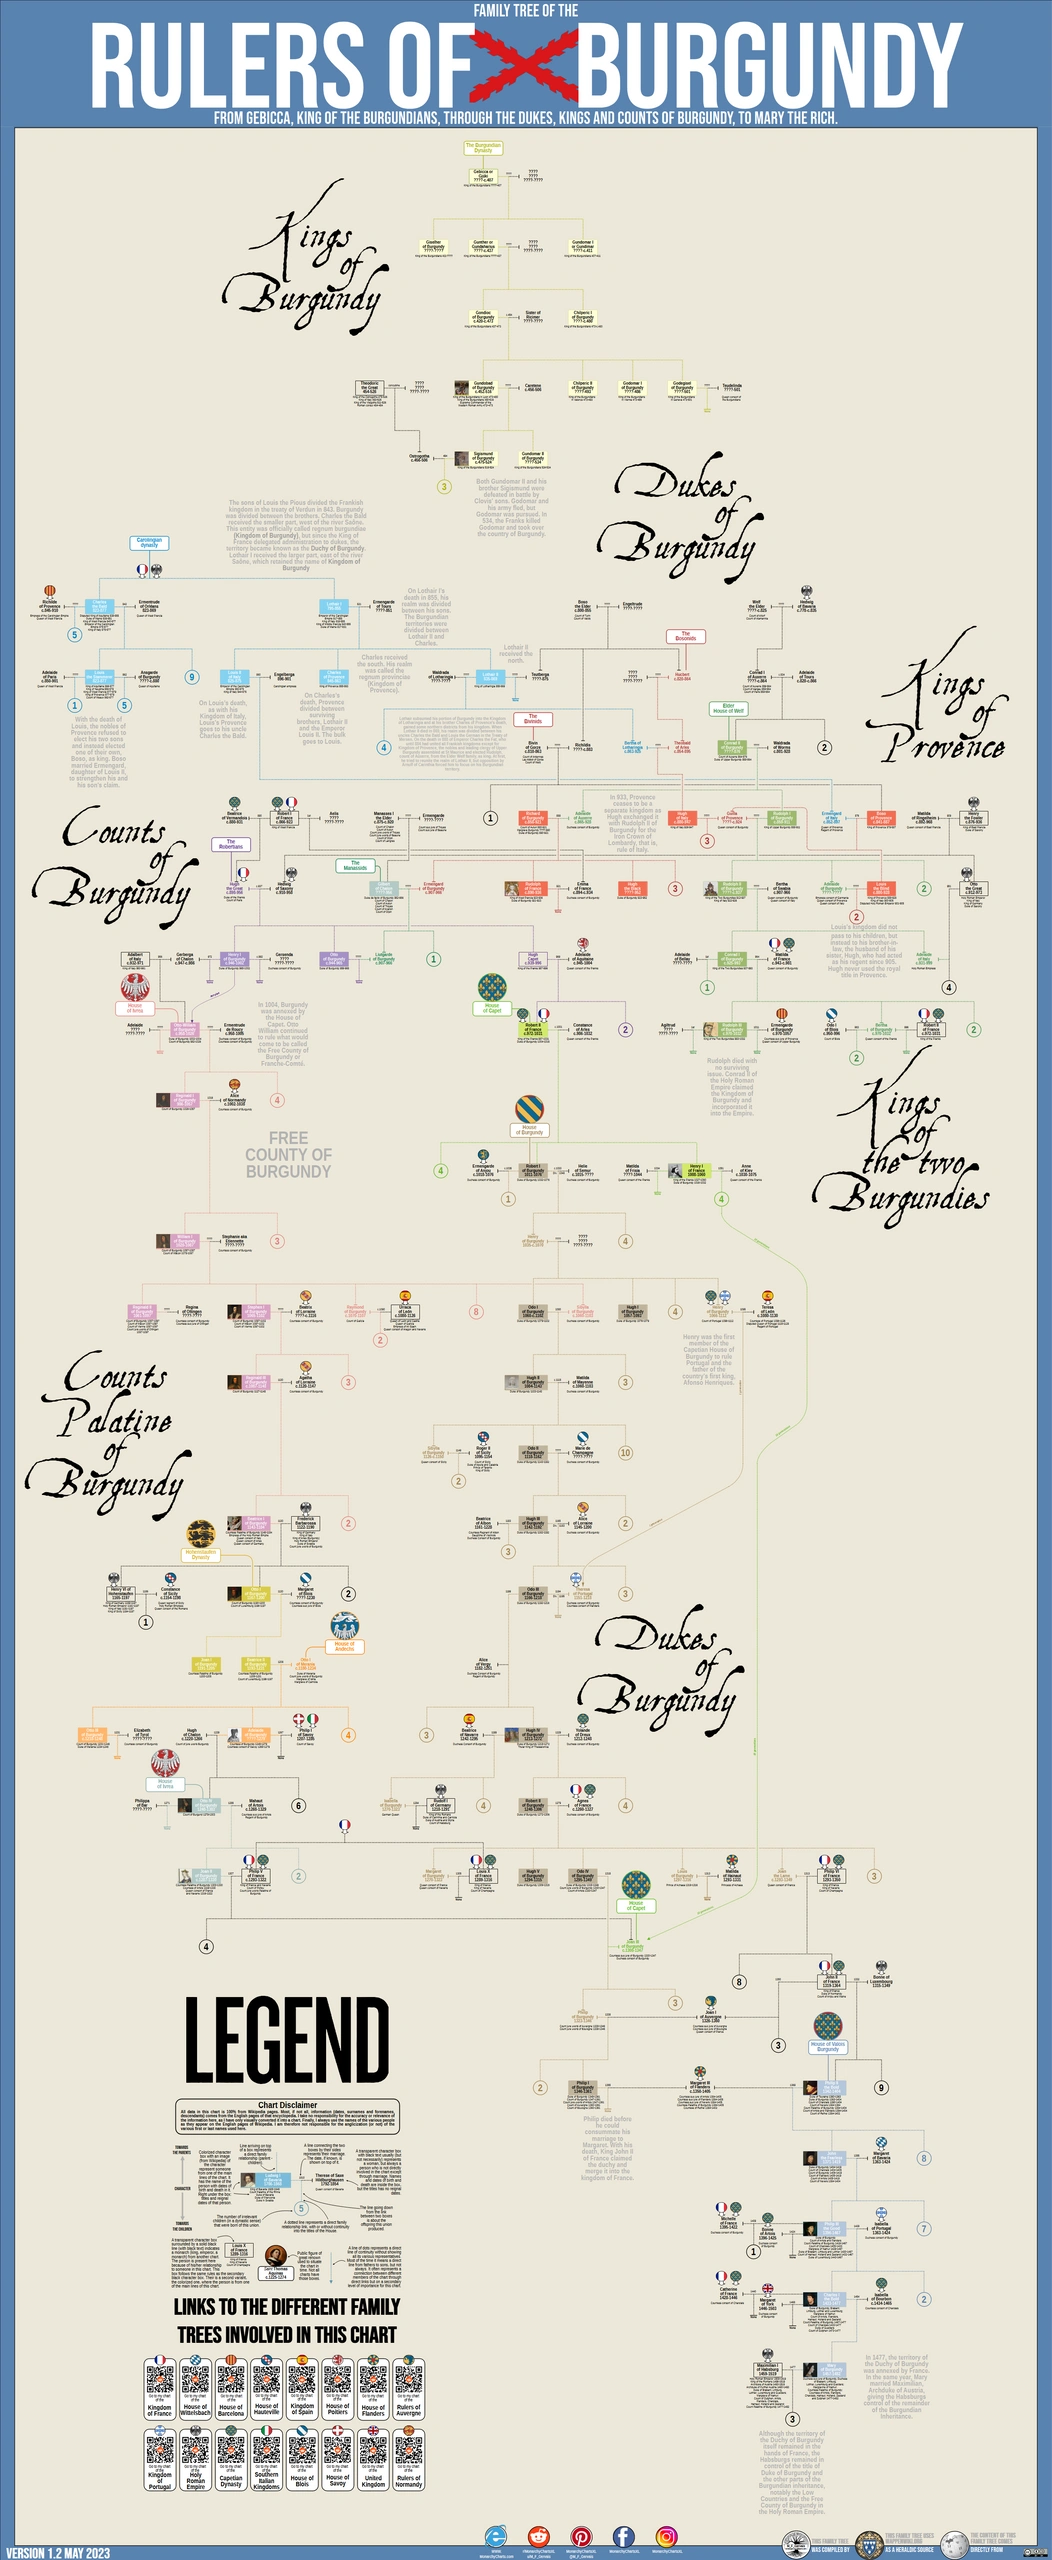 CHART, FAMILY TREE OF THE RULERS OF BURGUNDY.